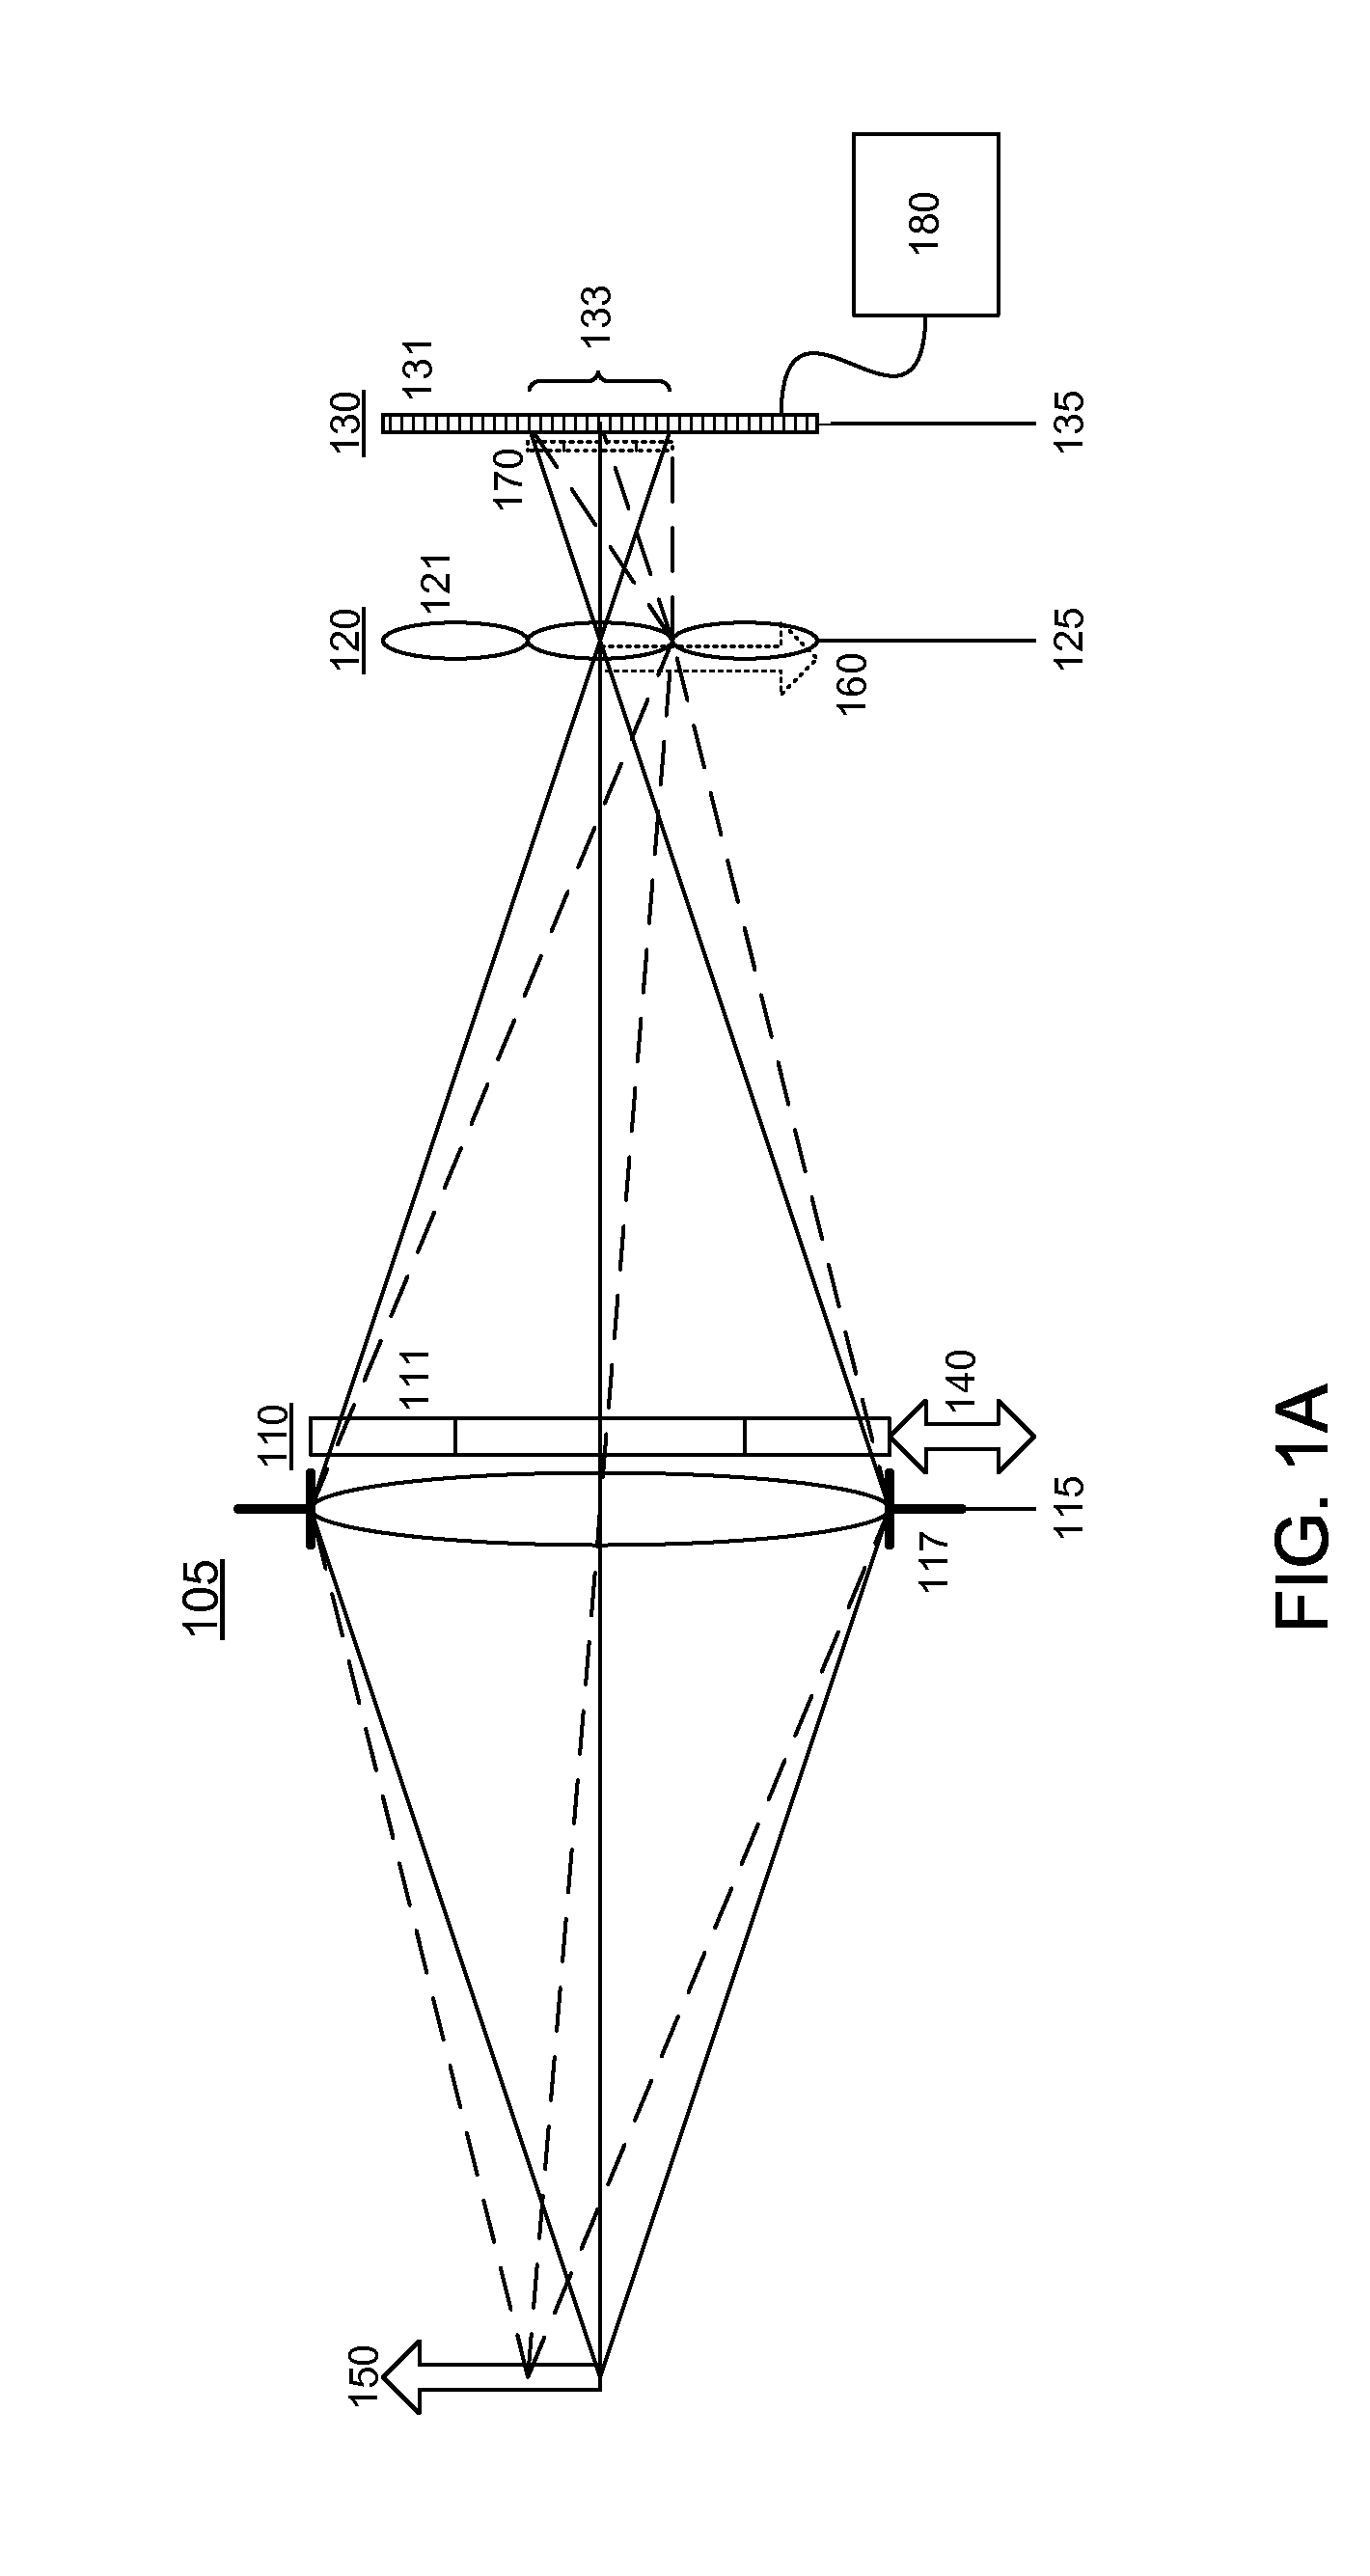 Adjustable multimode lightfield imaging system having an actuator for changing position of a non-homogeneous filter module relative to an image-forming optical module